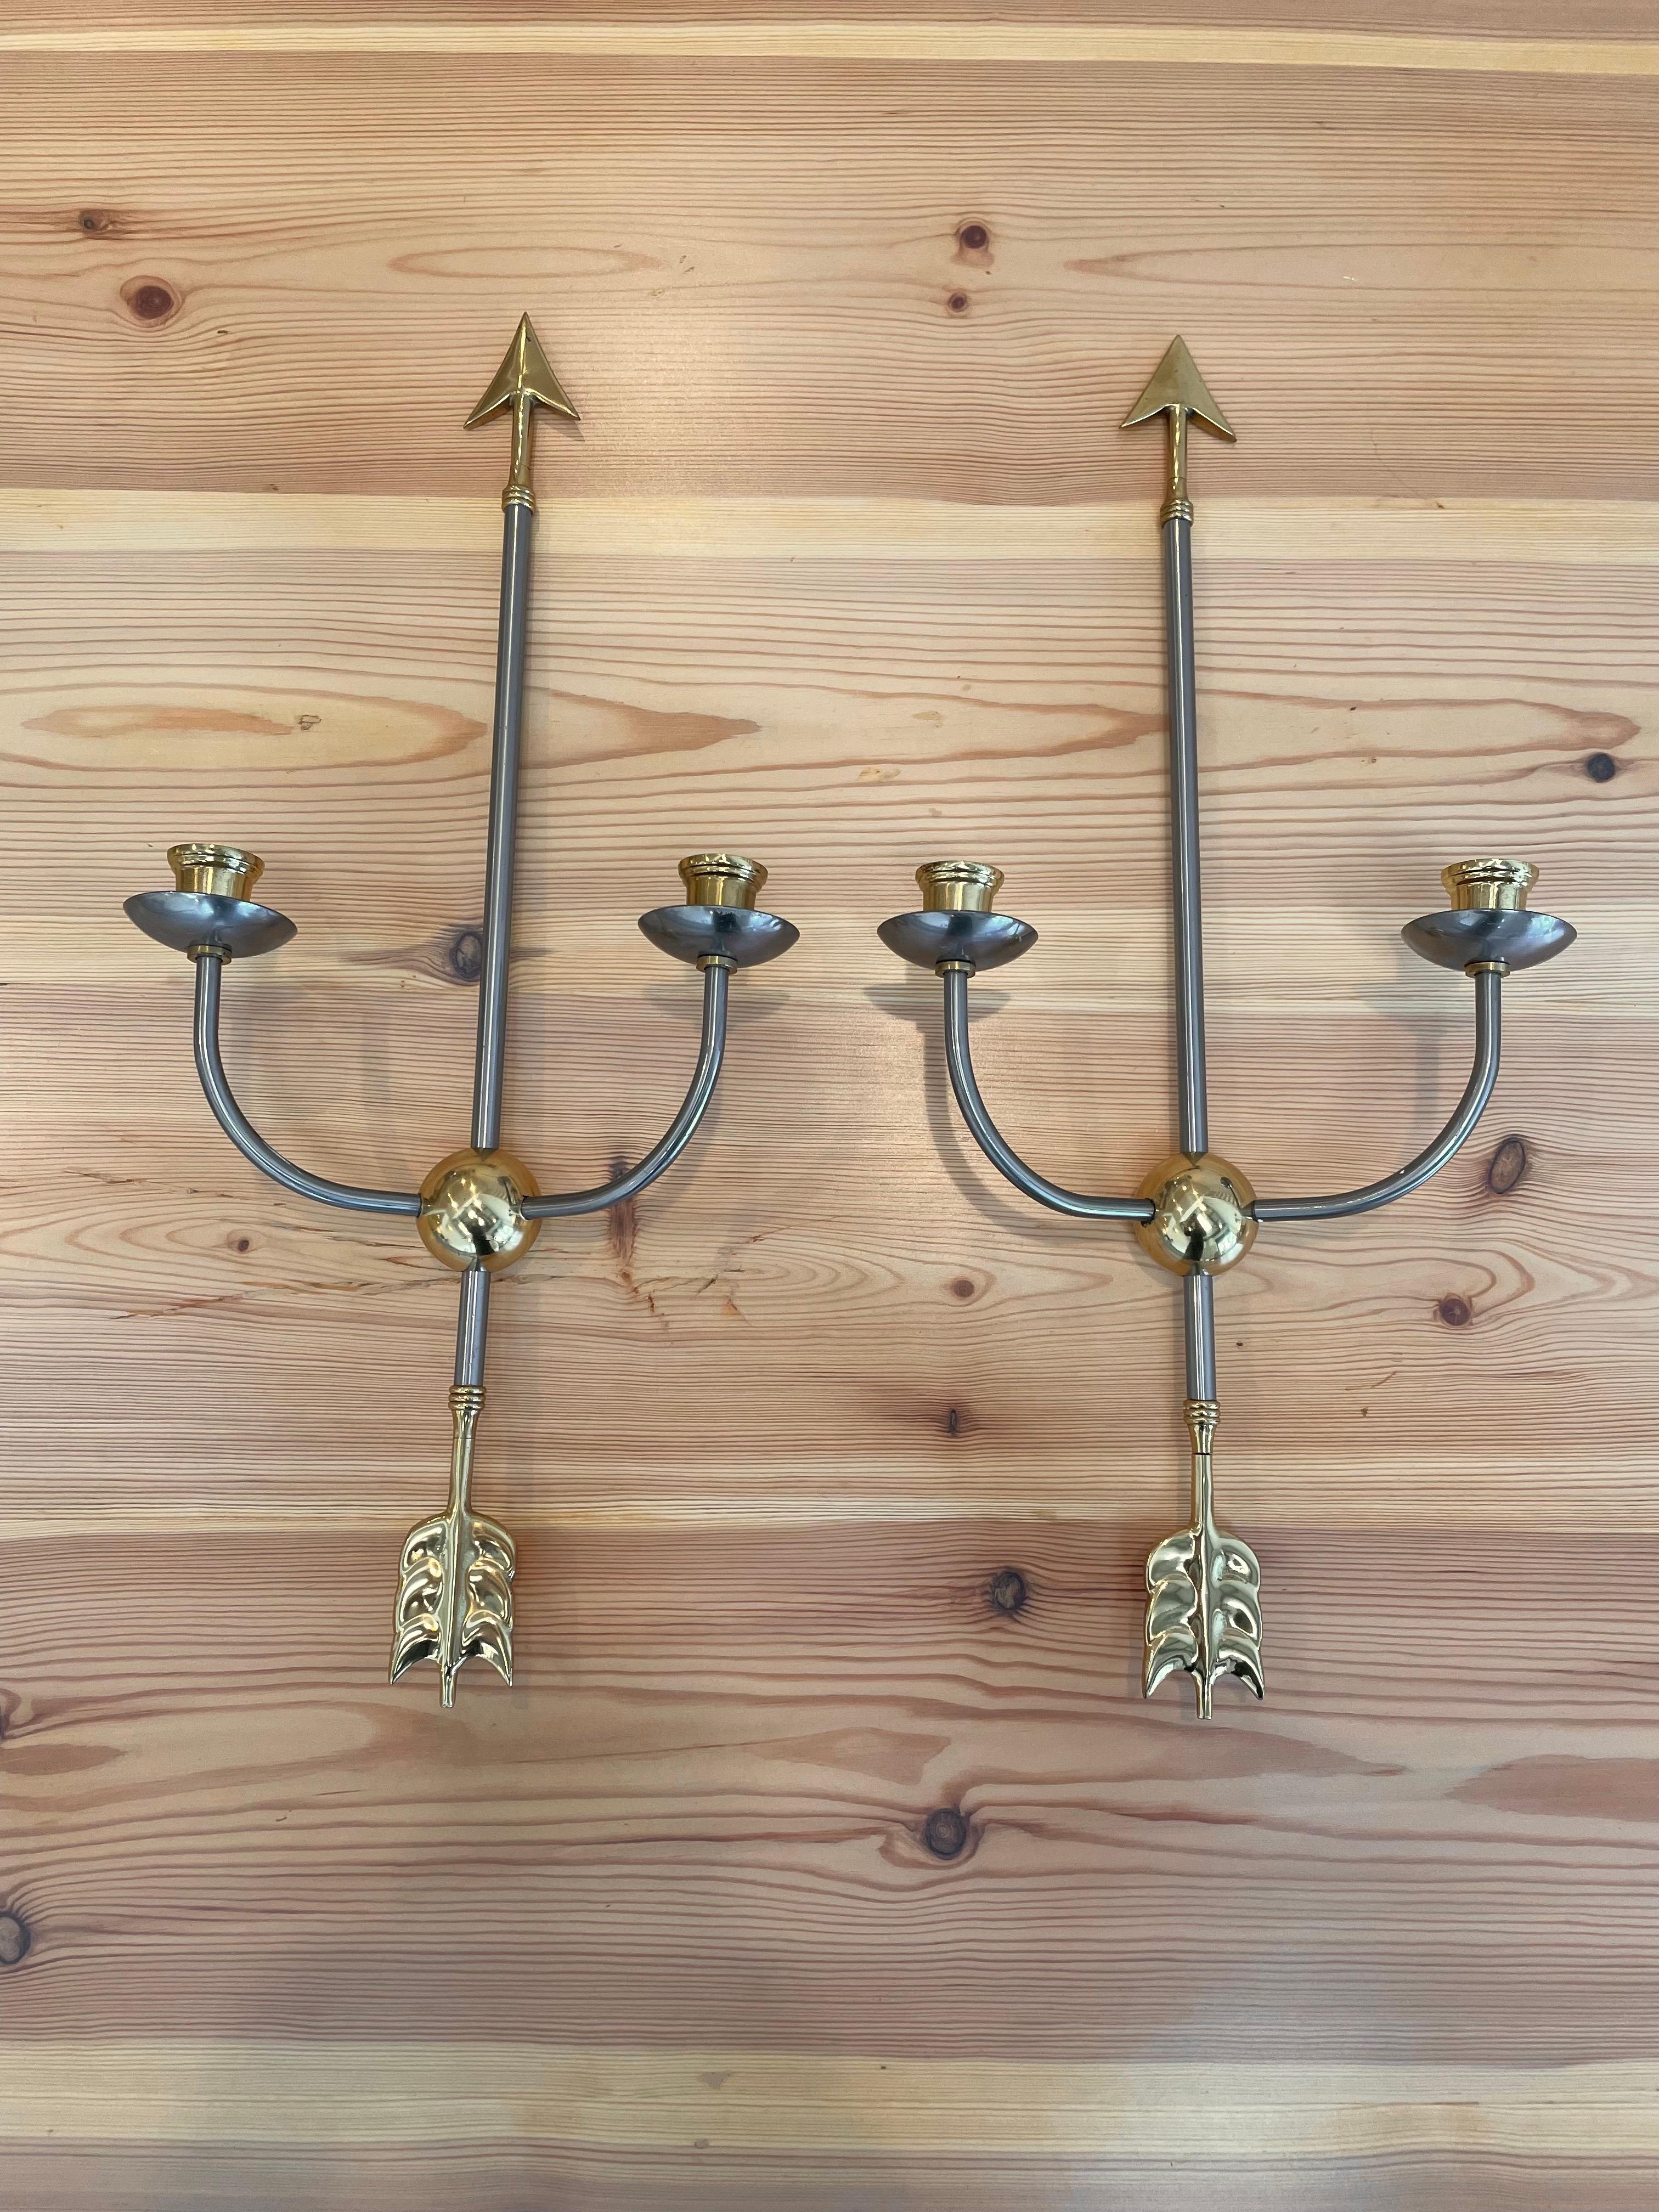 Height: 53cm
Depth: 10cm
Width: 24cm

Date: 1960s. 
Materials: Brass, Metal.

Description: Arrow wall sconces are stylish and versatile lighting fixtures that add a touch of charm and sophistication to any space. Inspired by the classic arrow shape,